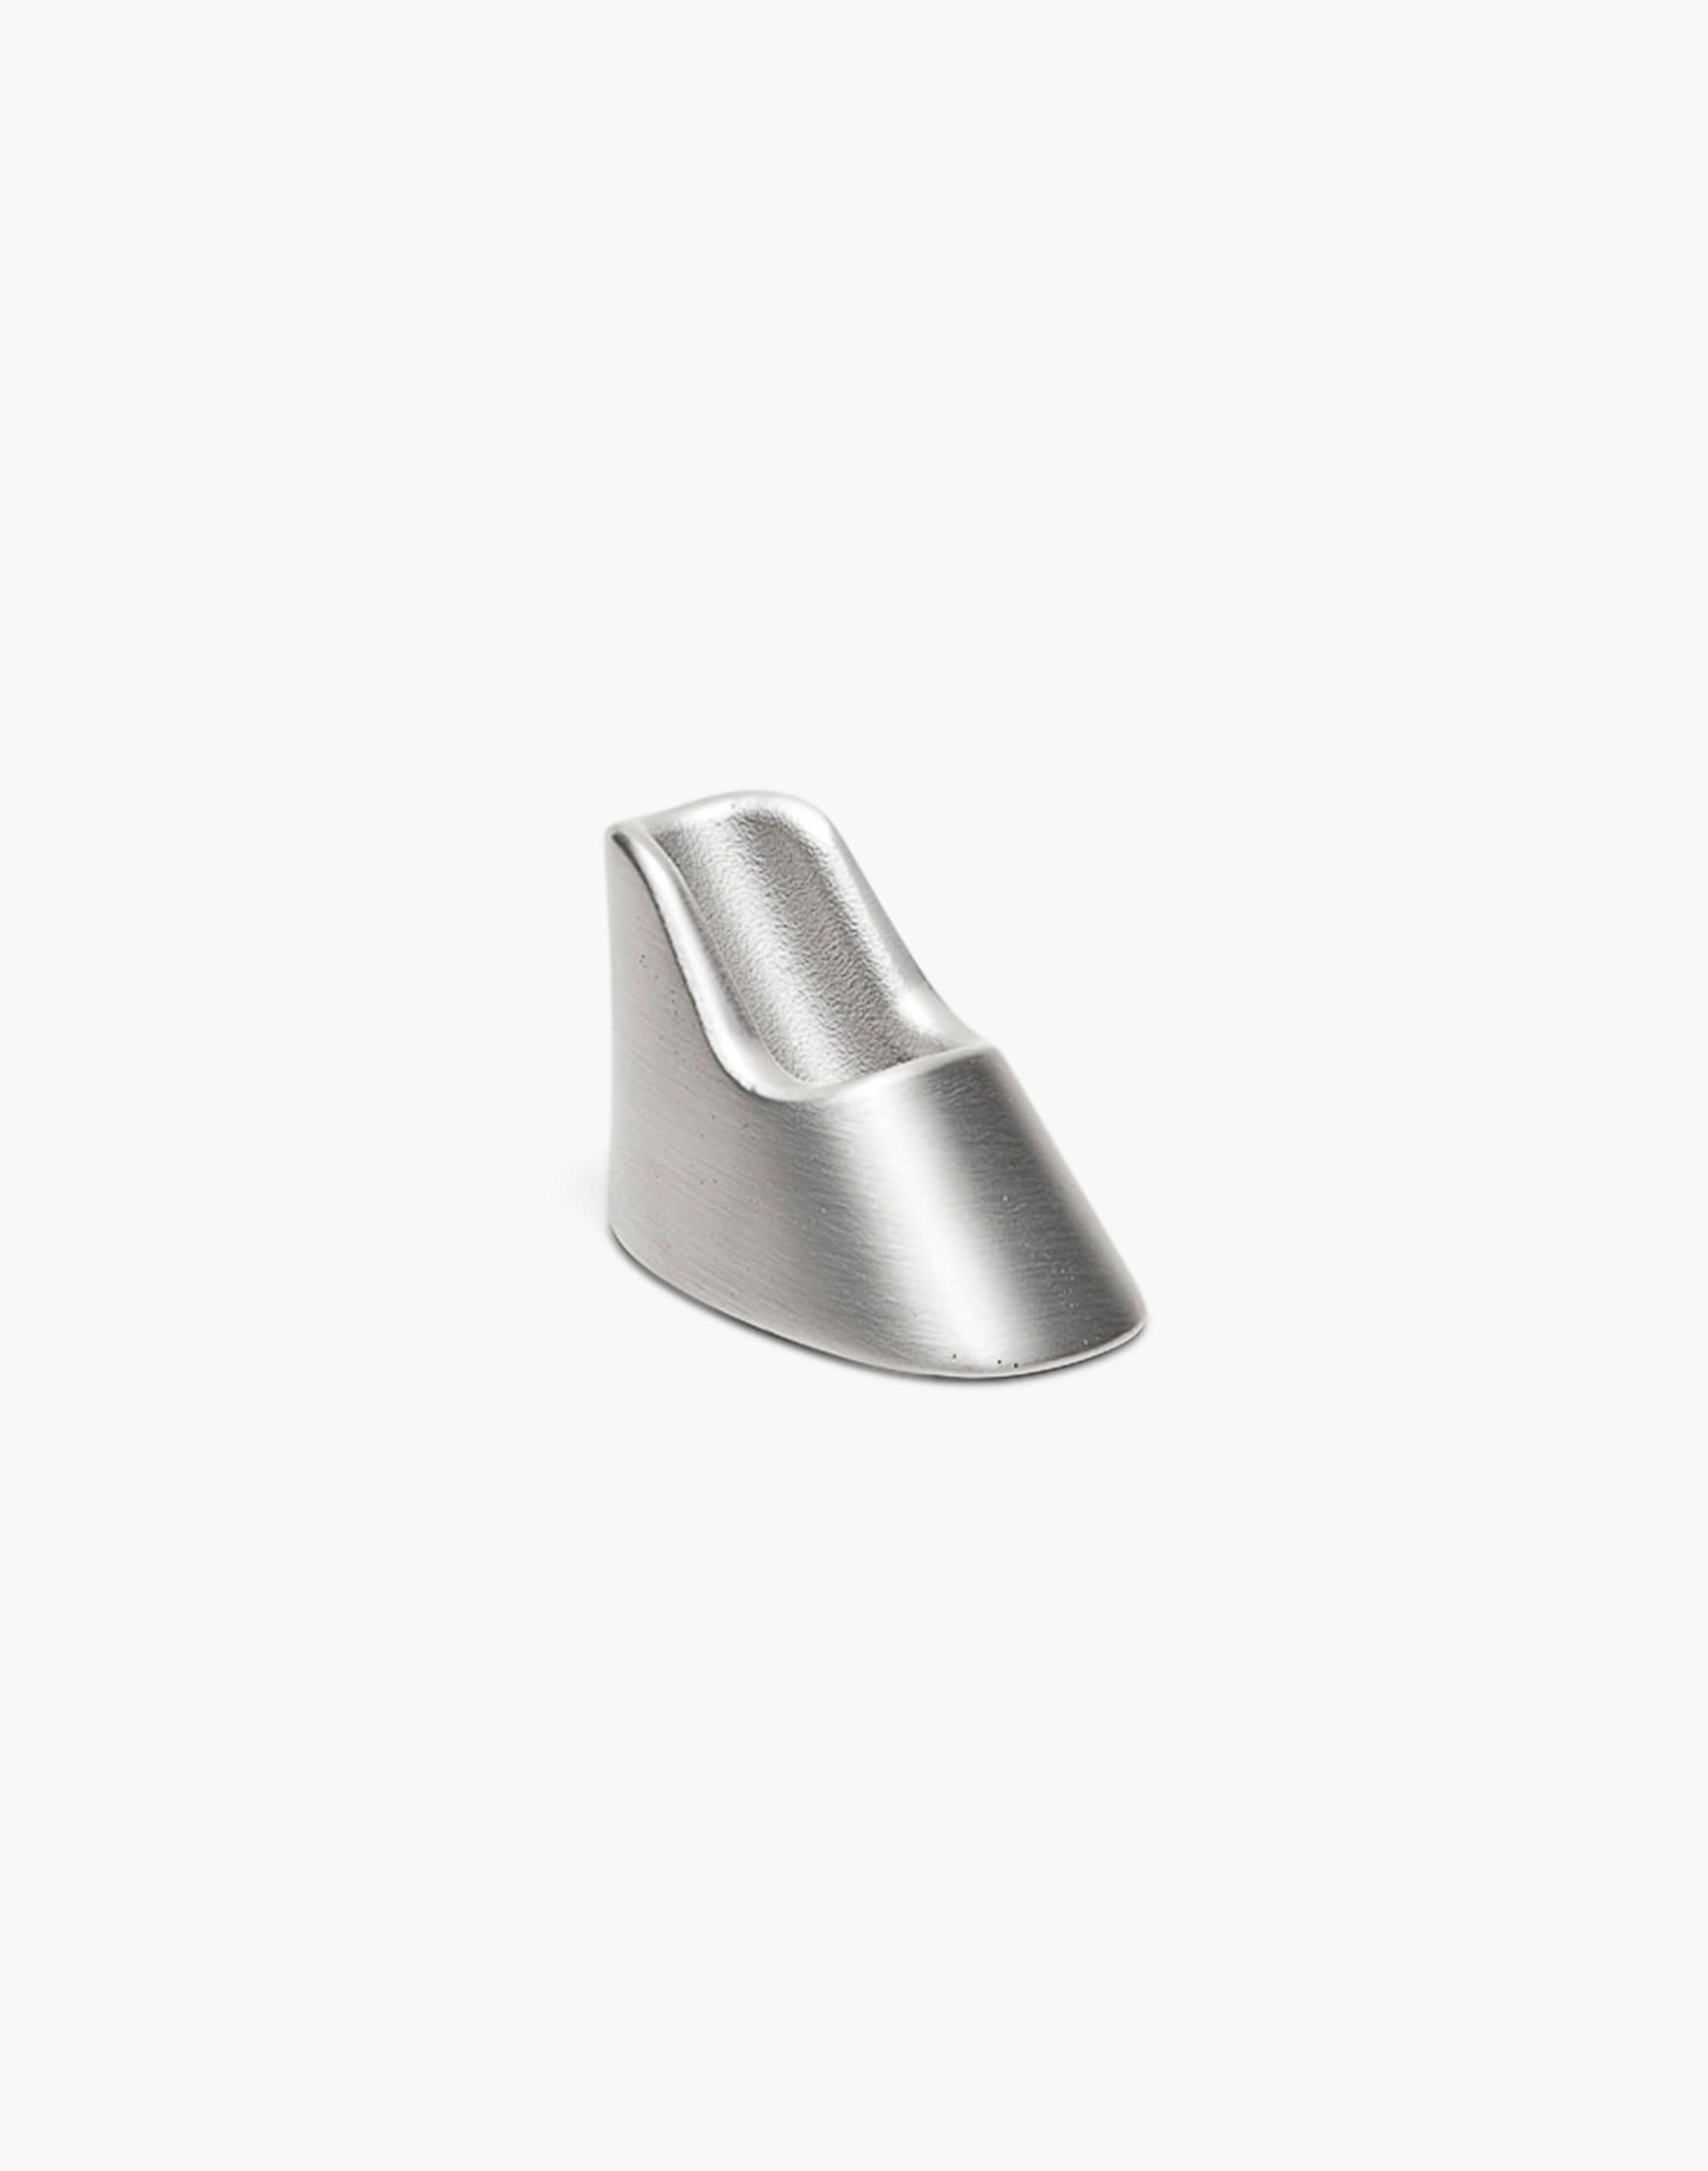 Craighill™ Stainless Steel Pen Rest